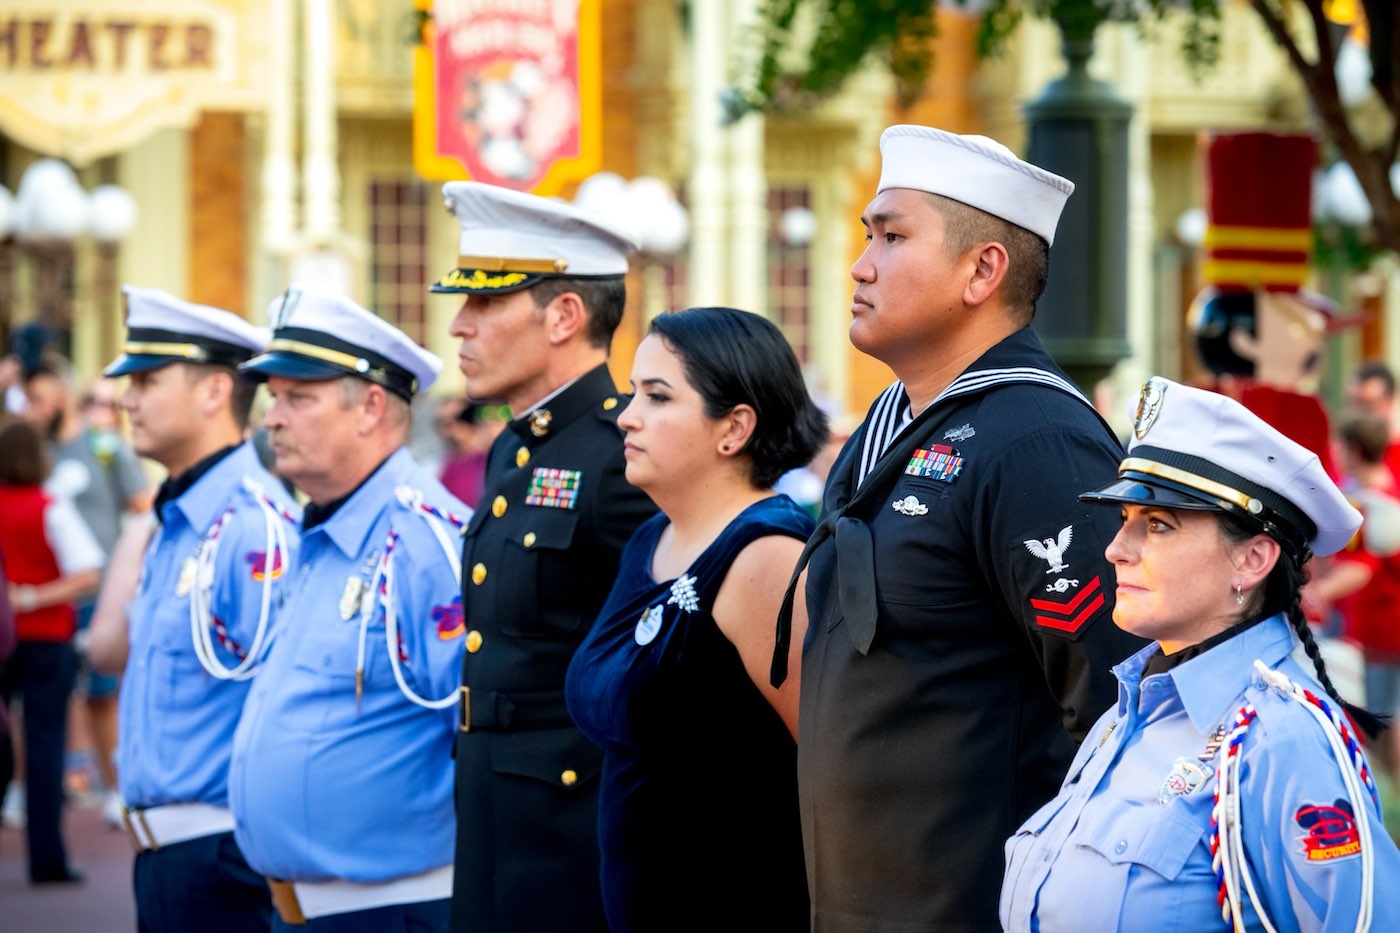 Uniformed service members lined up during a ceremony at a Disney park.